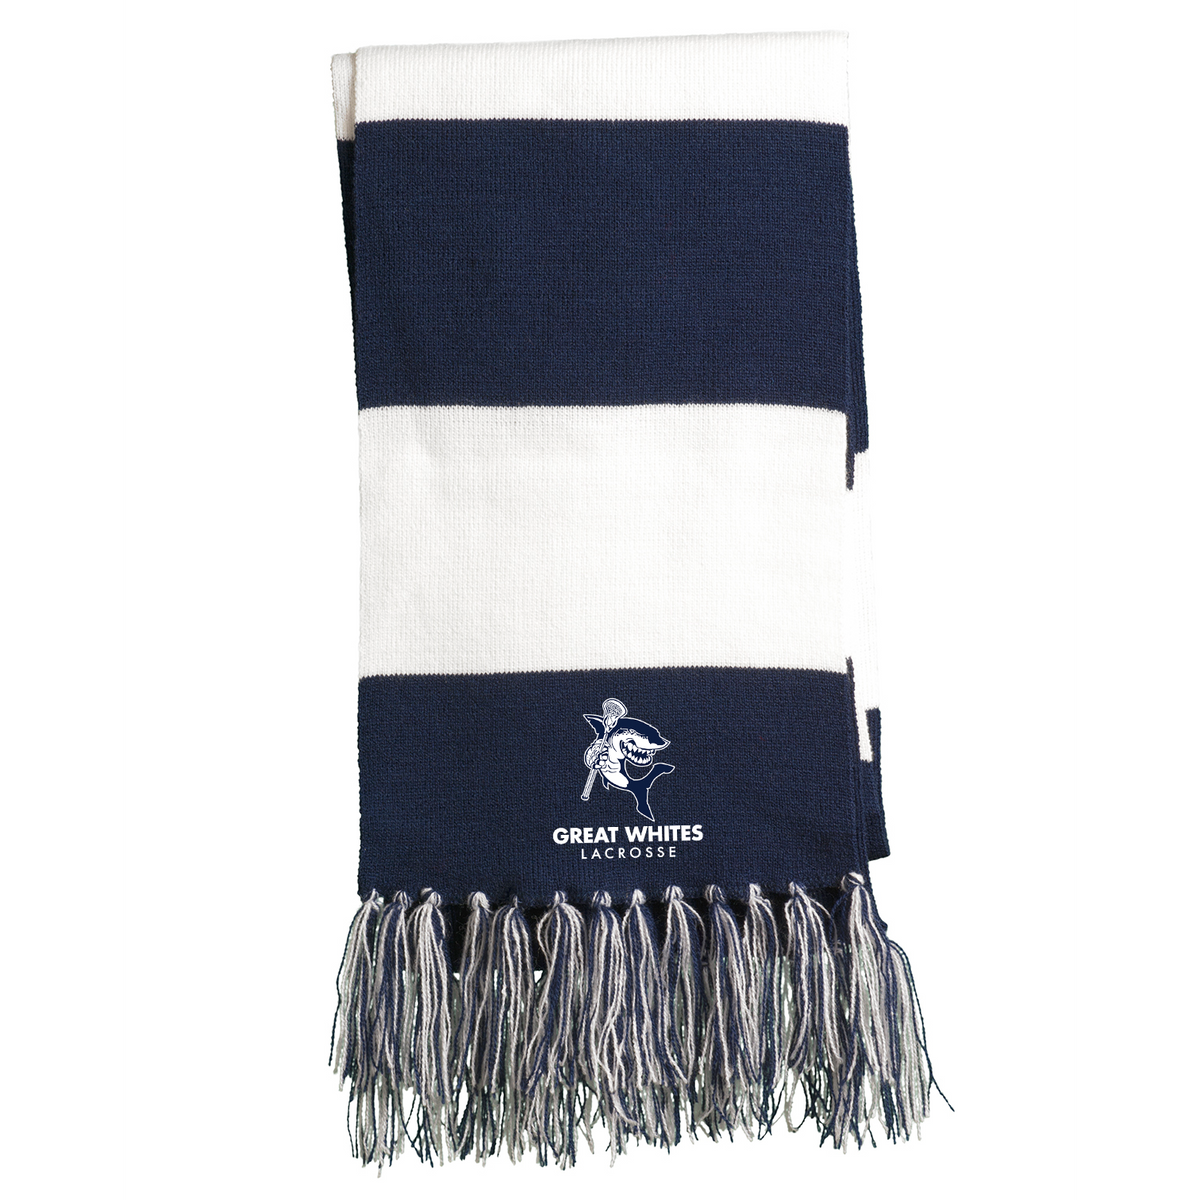 Great Whites Lacrosse Team Scarf